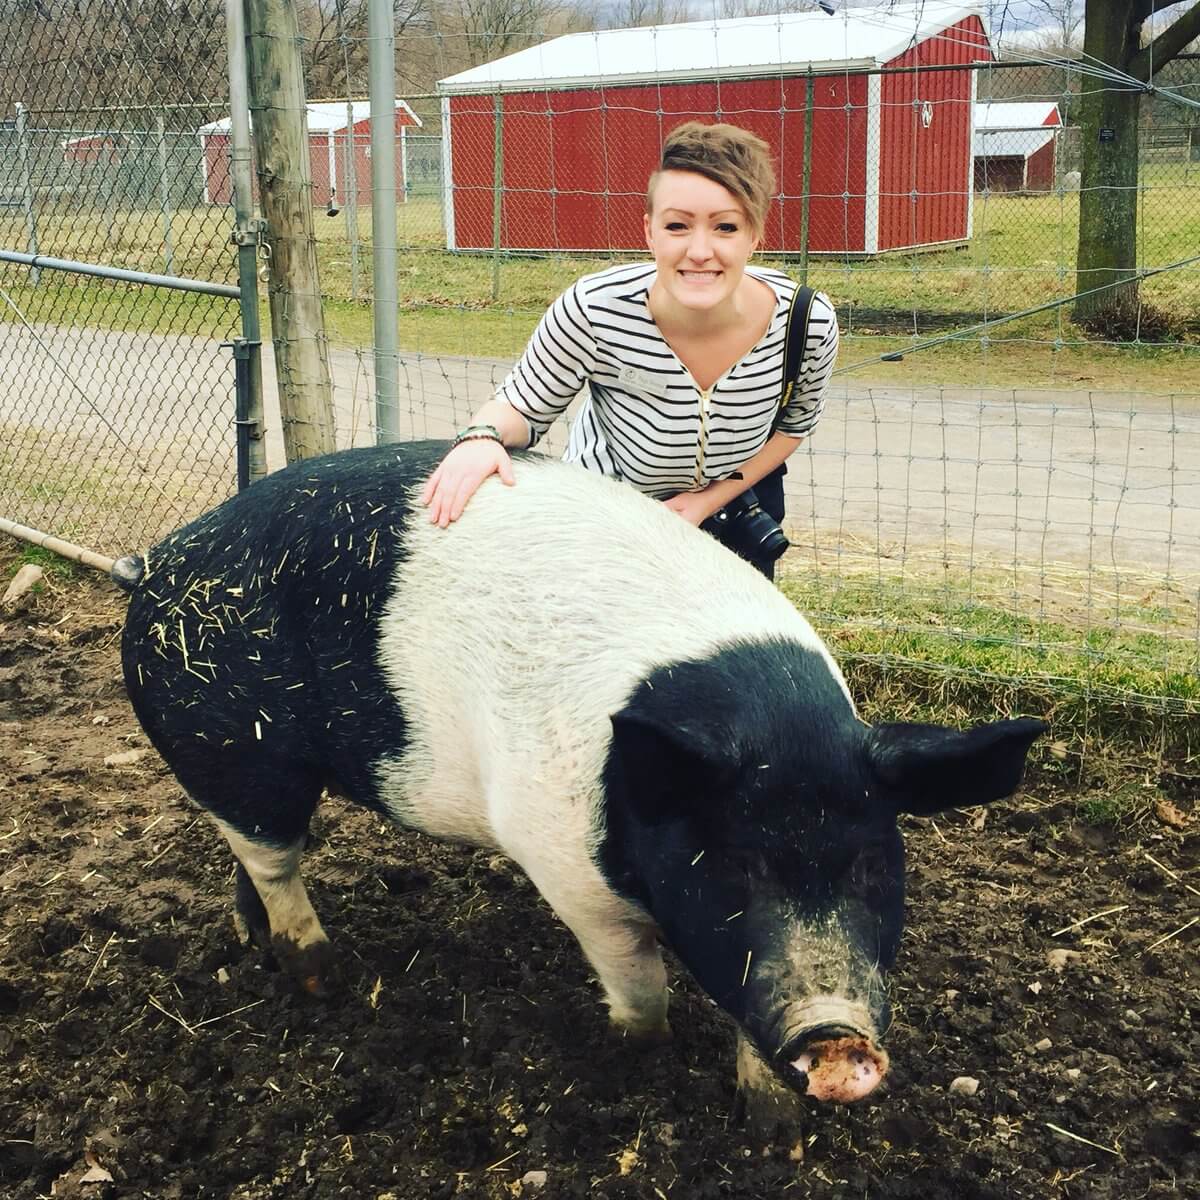 Paige Doerner of Lollypop Farm is all about sharing your city experiences with others.